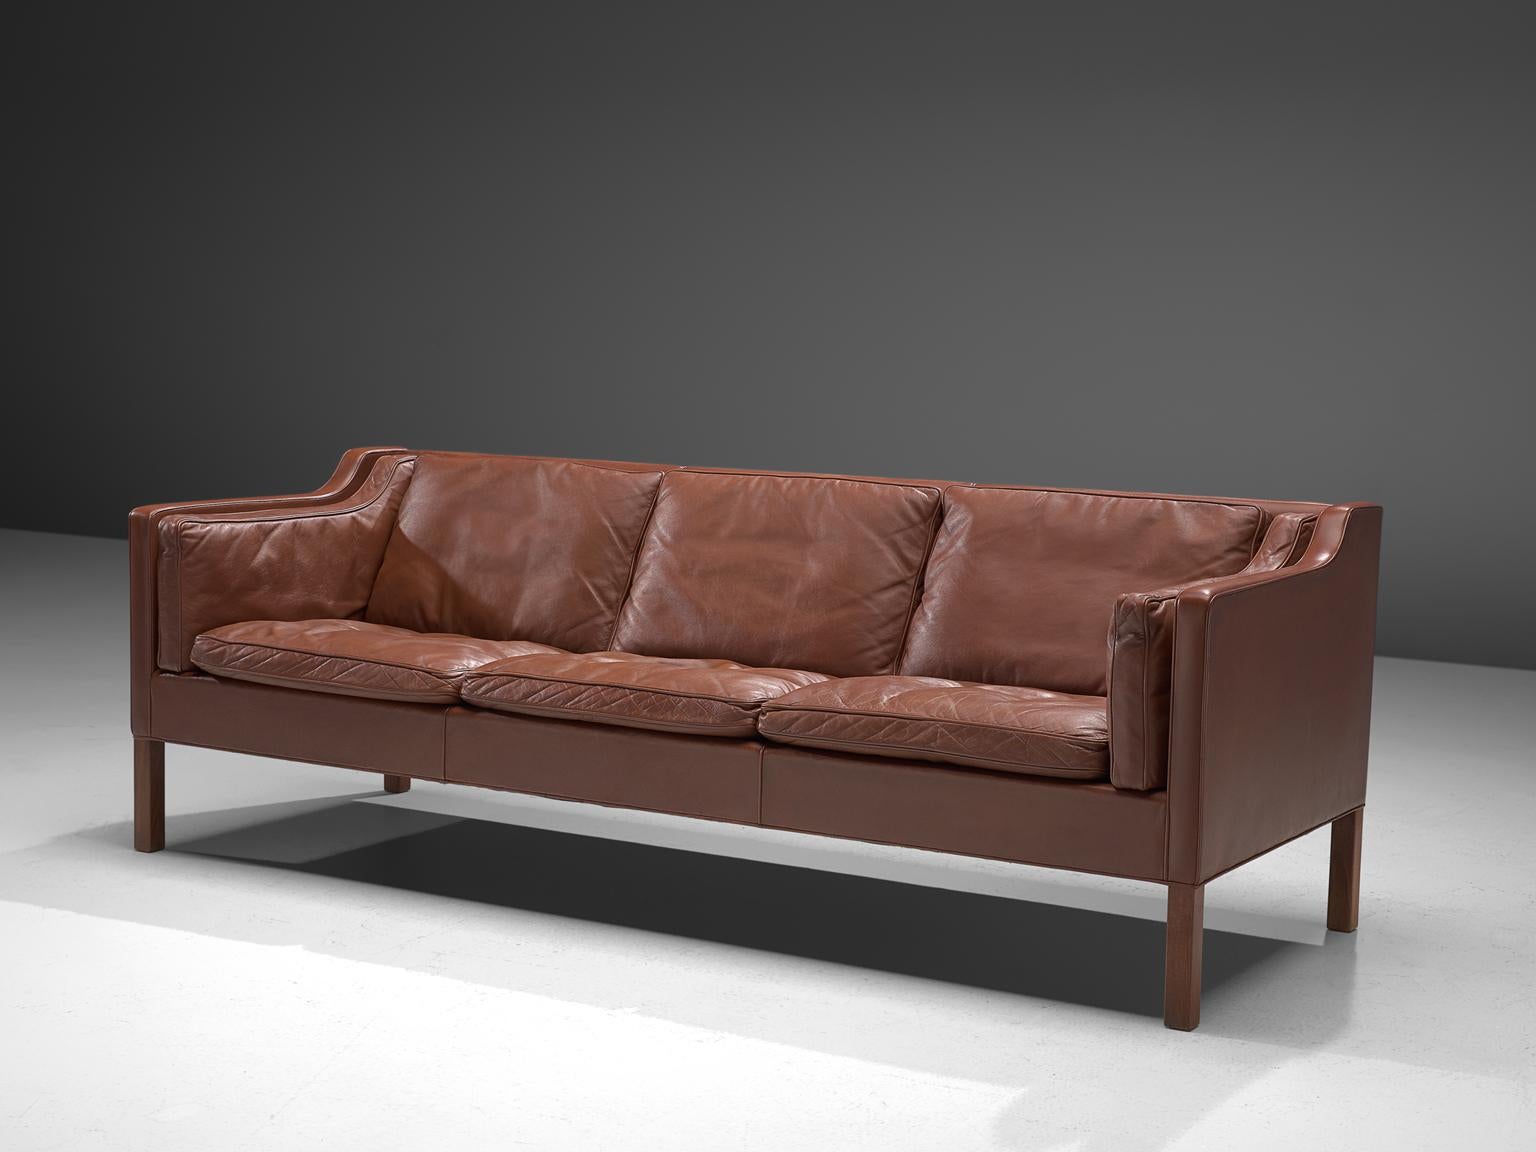 Børge Mogensen for Fredericia Stolefabrik, 3-seat sofa BM2213, leather and stained oak, Denmark 1962. 

Very well conditioned 3 seater sofa from Børge Mogensen. This model was designed by Mogensen for his own home, in his goal to create the ultimate